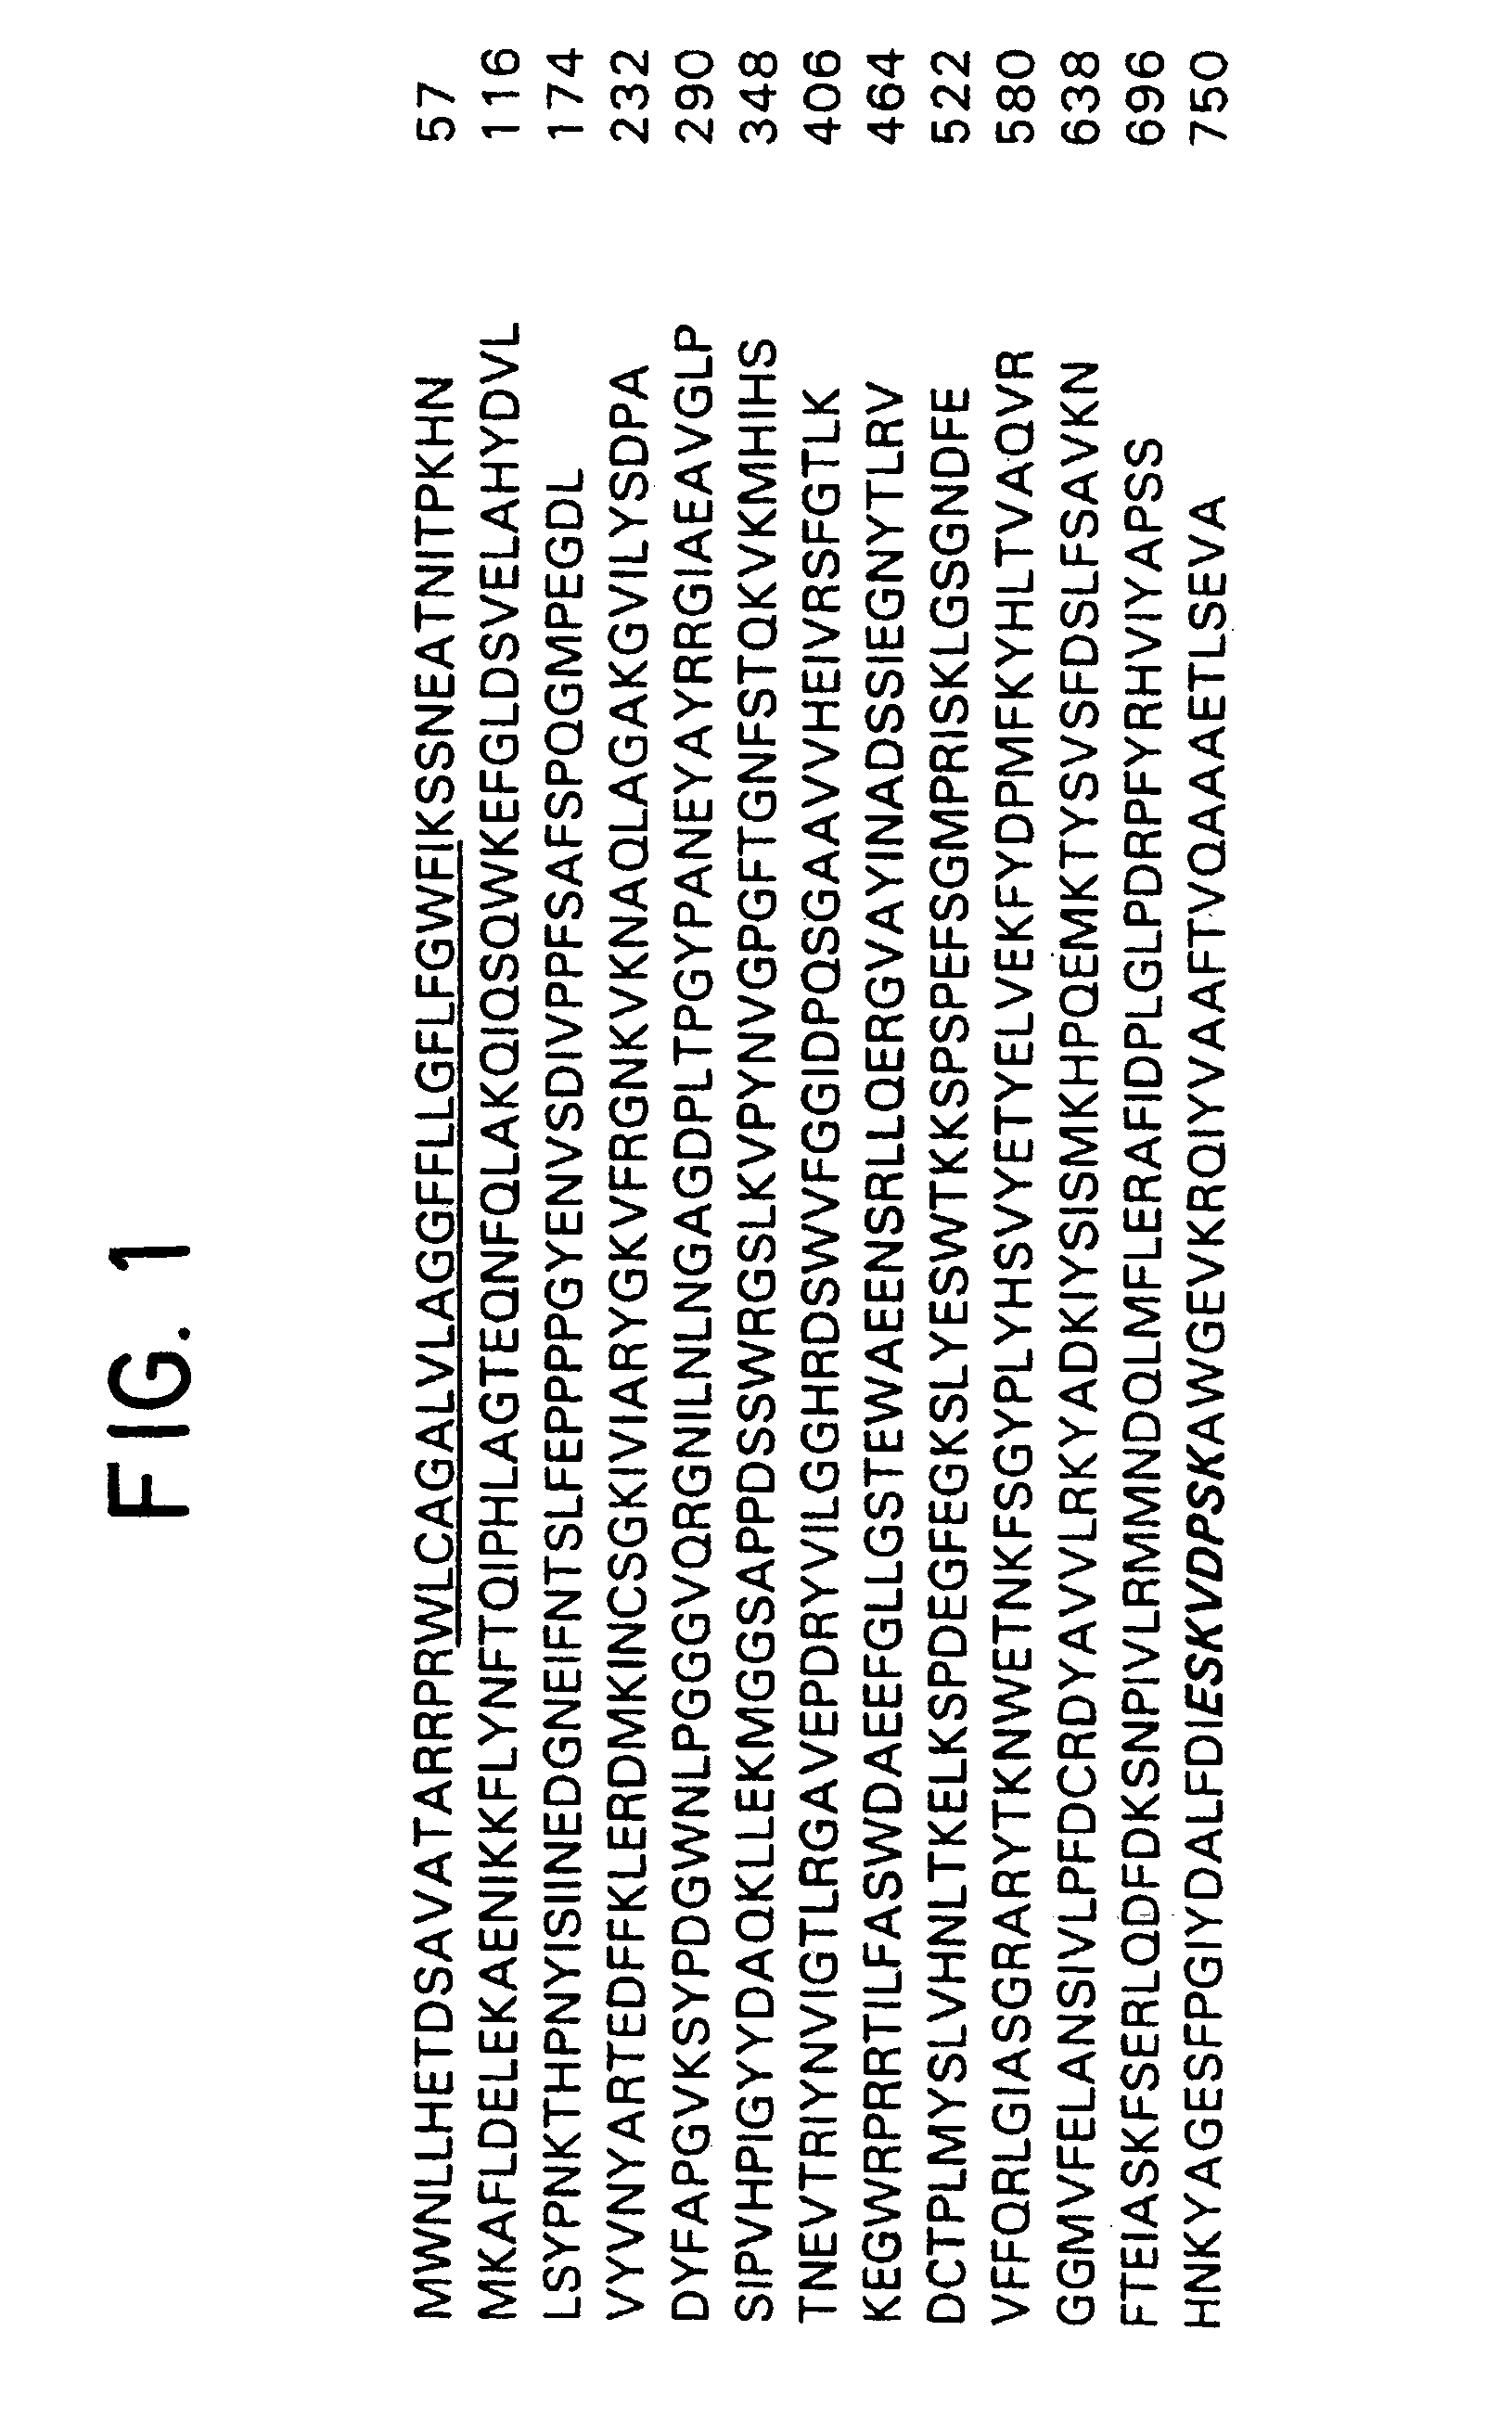 Monoclonal antibody specific for the extracellular domain of prostate specific membrane antigen